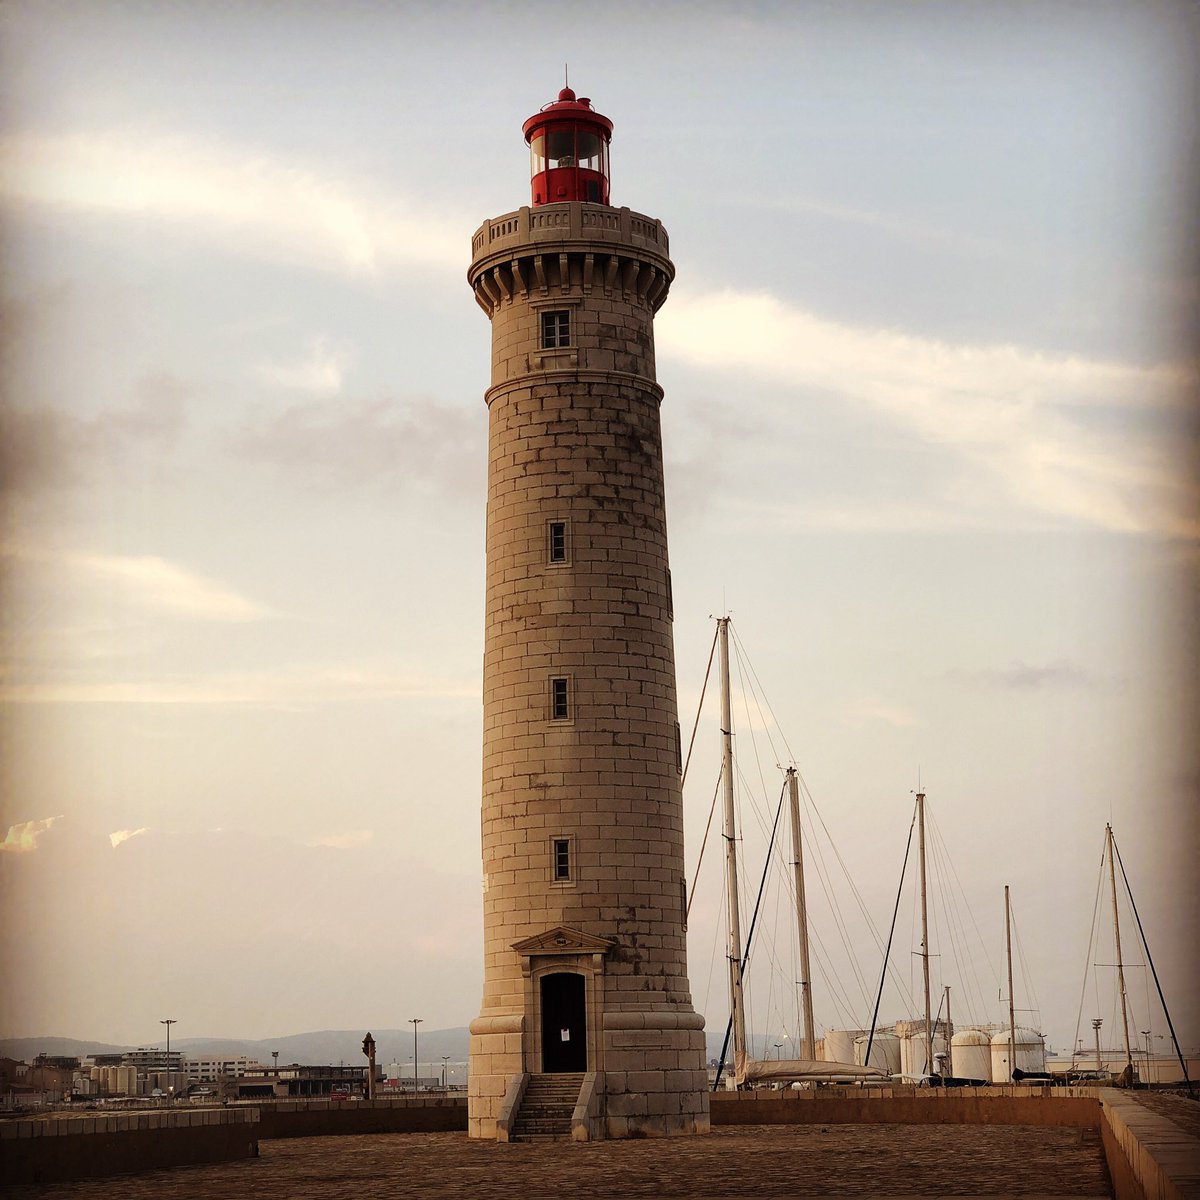 A French lighthouse - Le Phare Saint-Louis. Built around 1680, demolished in 1944 by the German army, it was rebuilt in 1948.
#busmansholiday #lighthouses #france #sete #lighthouses_around_the_world